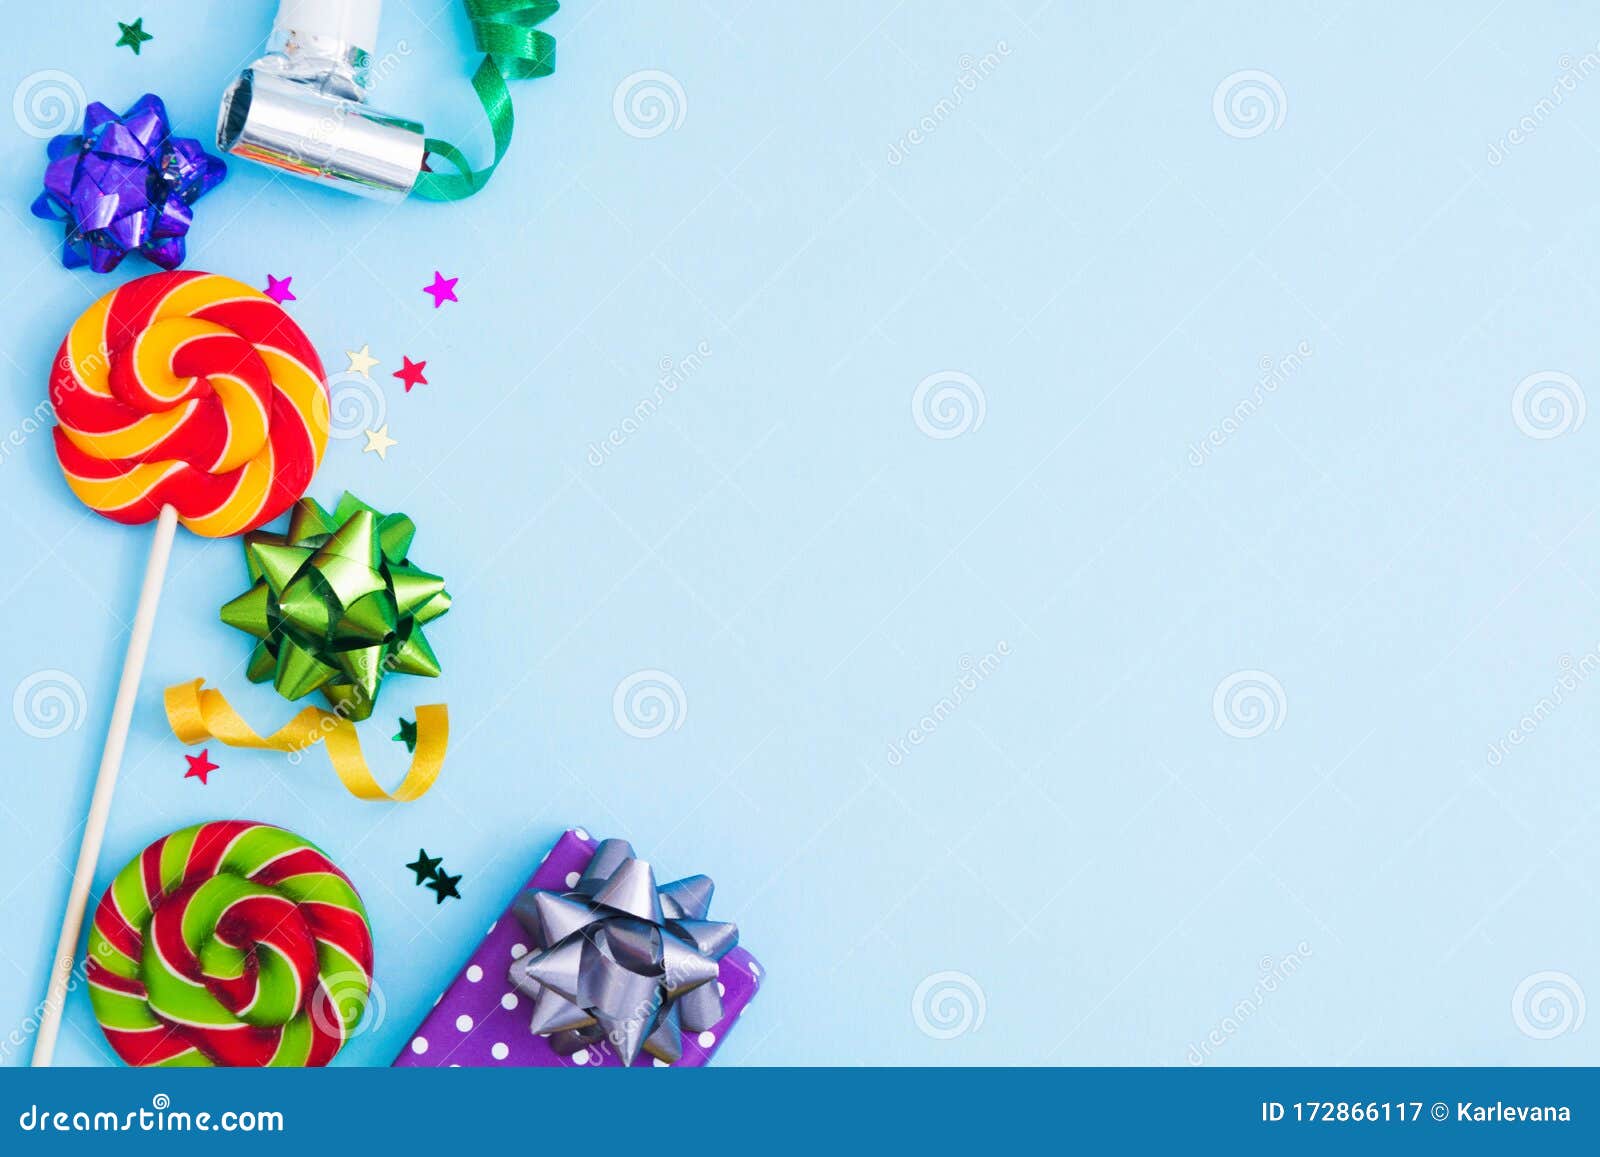 birthday background with candies, bows, confeti and gift box over blue backgroud